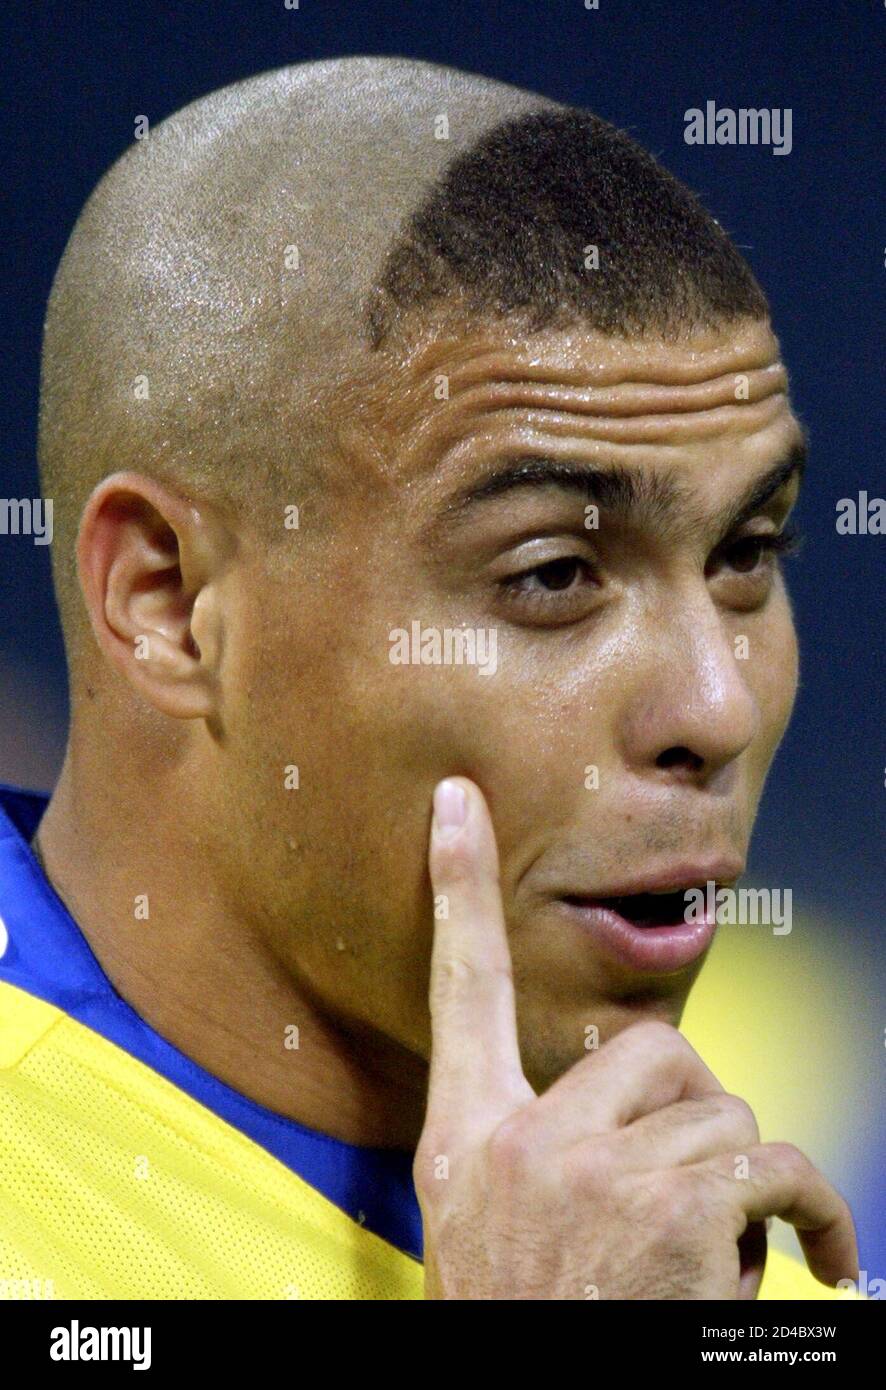 Brazil's striker Ronaldo points to his new hair cut as he trains with his  team at Saitama stadium June 24, 2002. Ronaldo, who has been suffering from  an injured thigh, took part